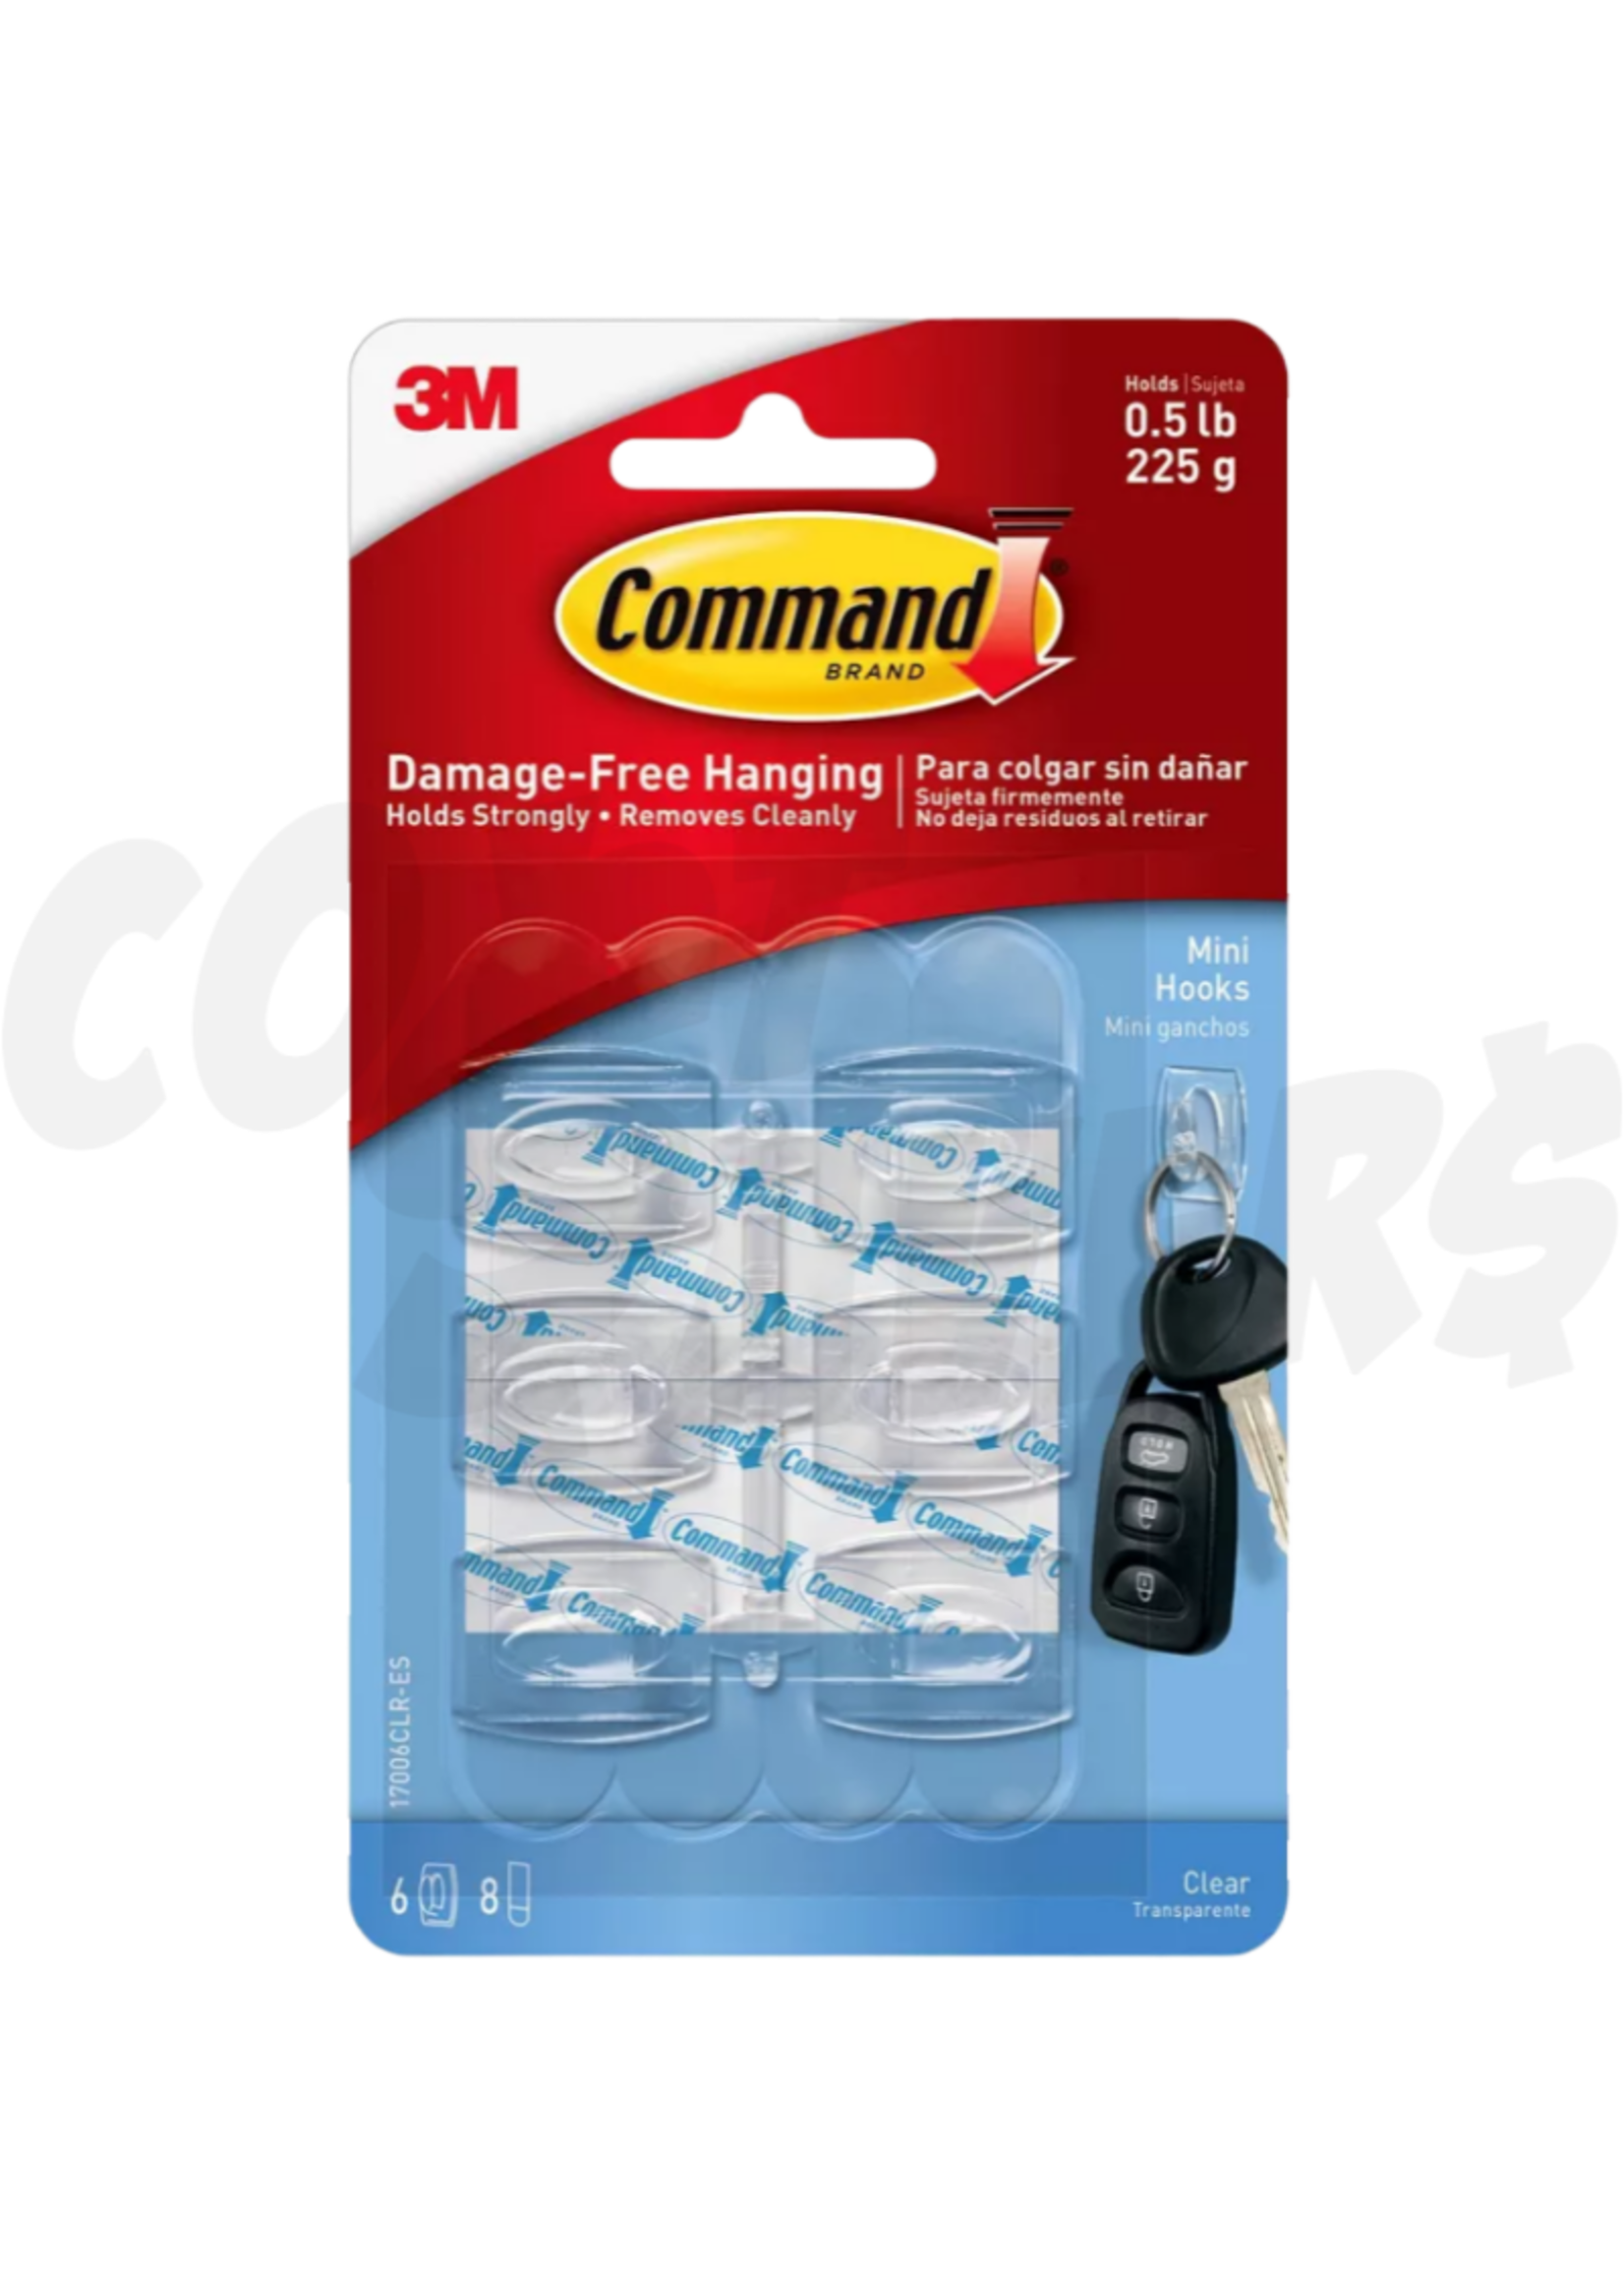 3M 3M Command Damage-Free Hanging 0.5Lbs (Clear)